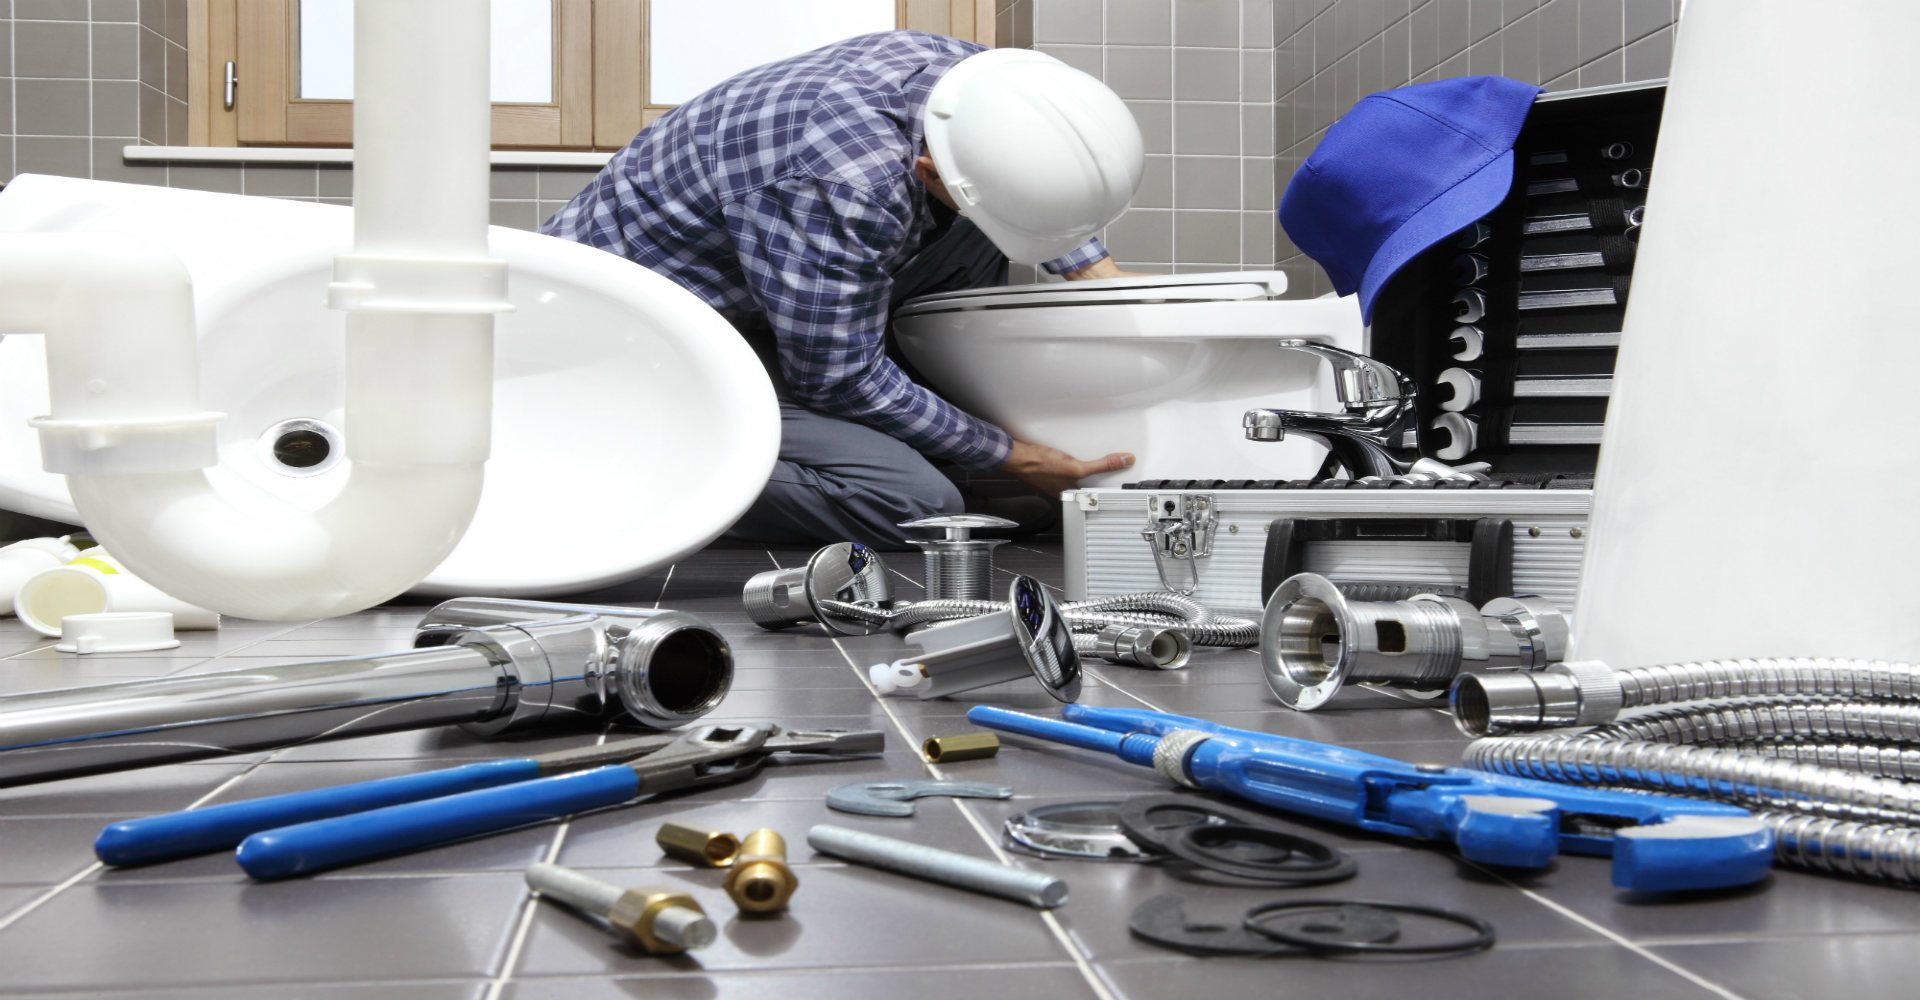 Quality and Expertise in Plumbing: Miami 305 Plumbing